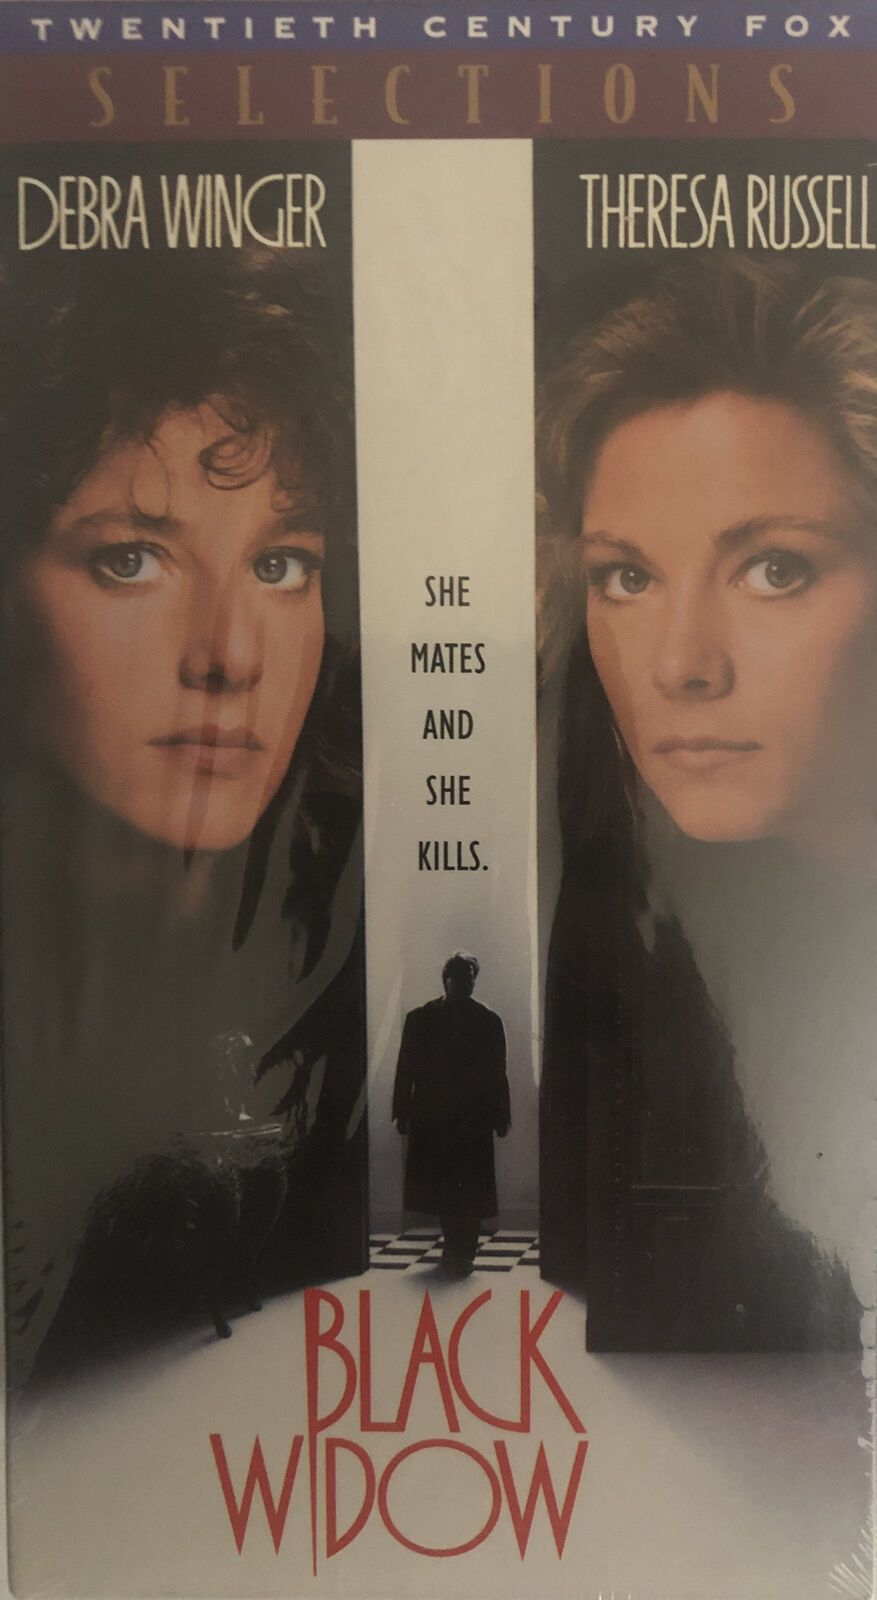 Primary image for Black Widow(VHS,1995)Debra Winger,Theresa Russell-RARE VINTAGE-NEW SEALED-SHIP24